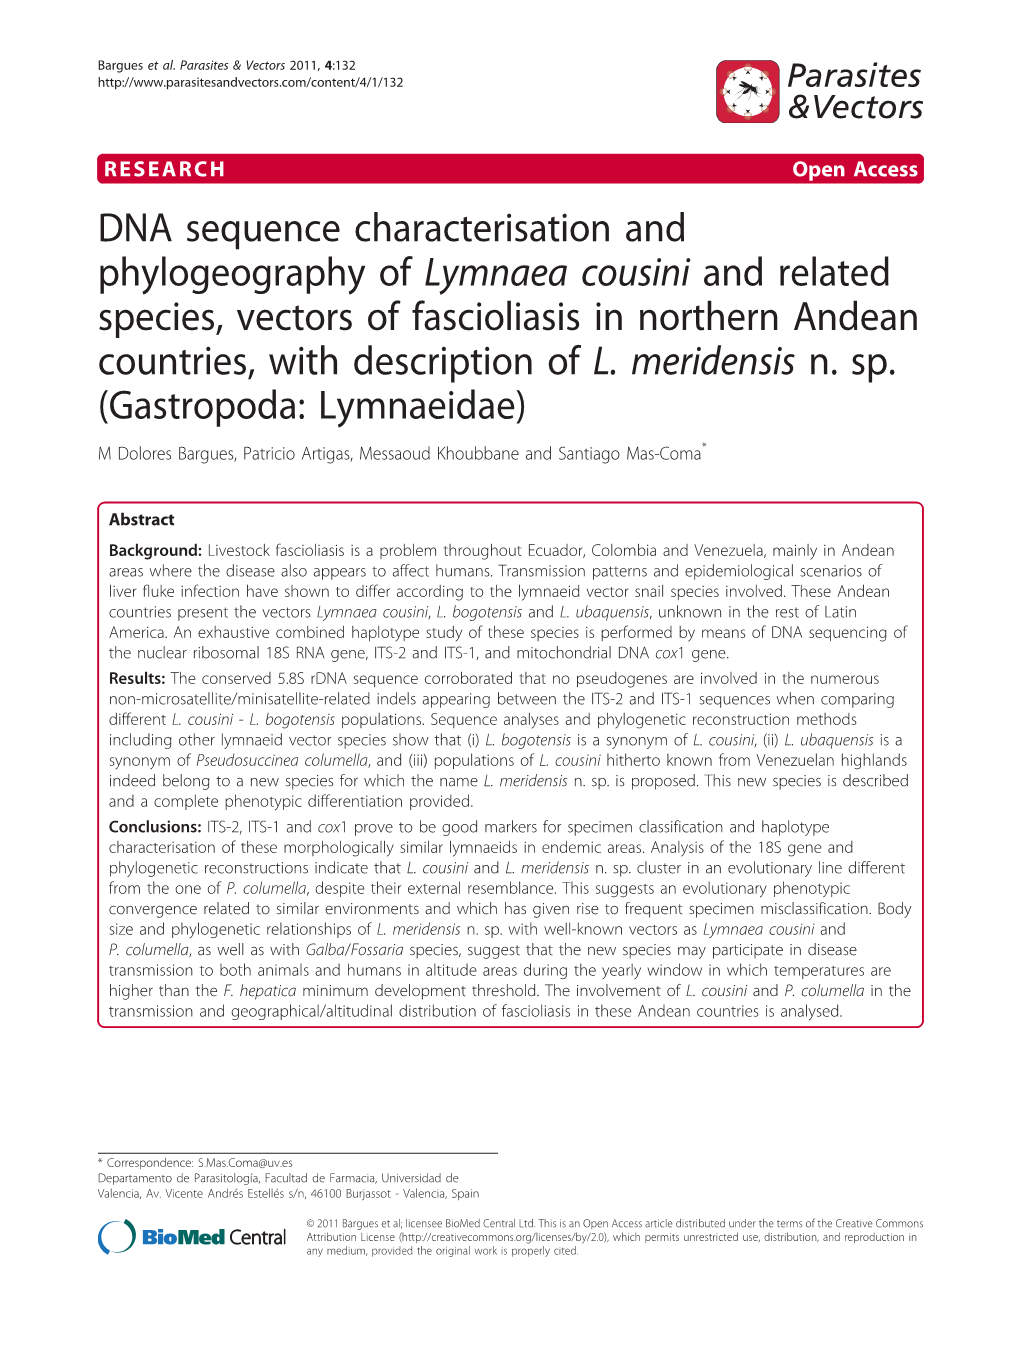 DNA Sequence Characterisation and Phylogeography of Lymnaea Cousini and Related Species, Vectors of Fascioliasis in Northern Andean Countries, with Description of L